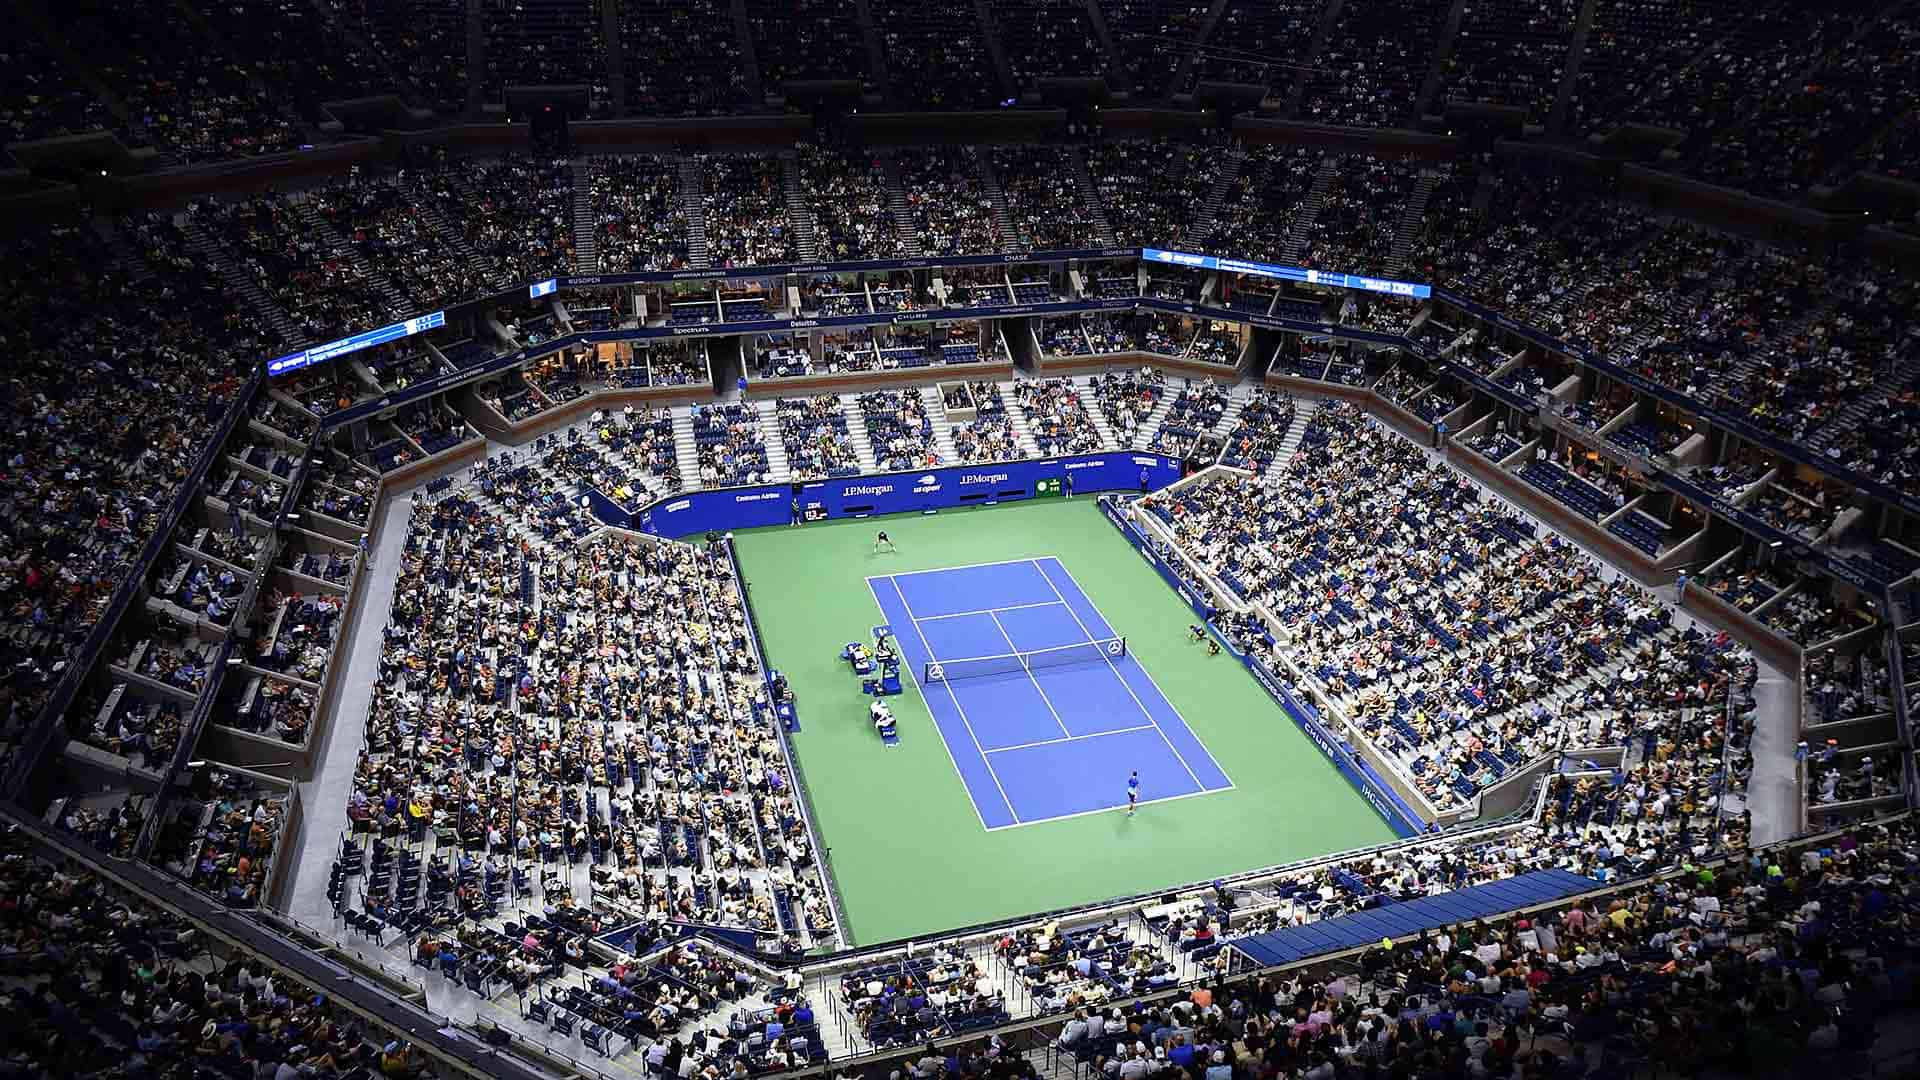 US OPEN TENNIS MATCHES ON THE LED SCREENS AND FINALS VIEWING PARTY